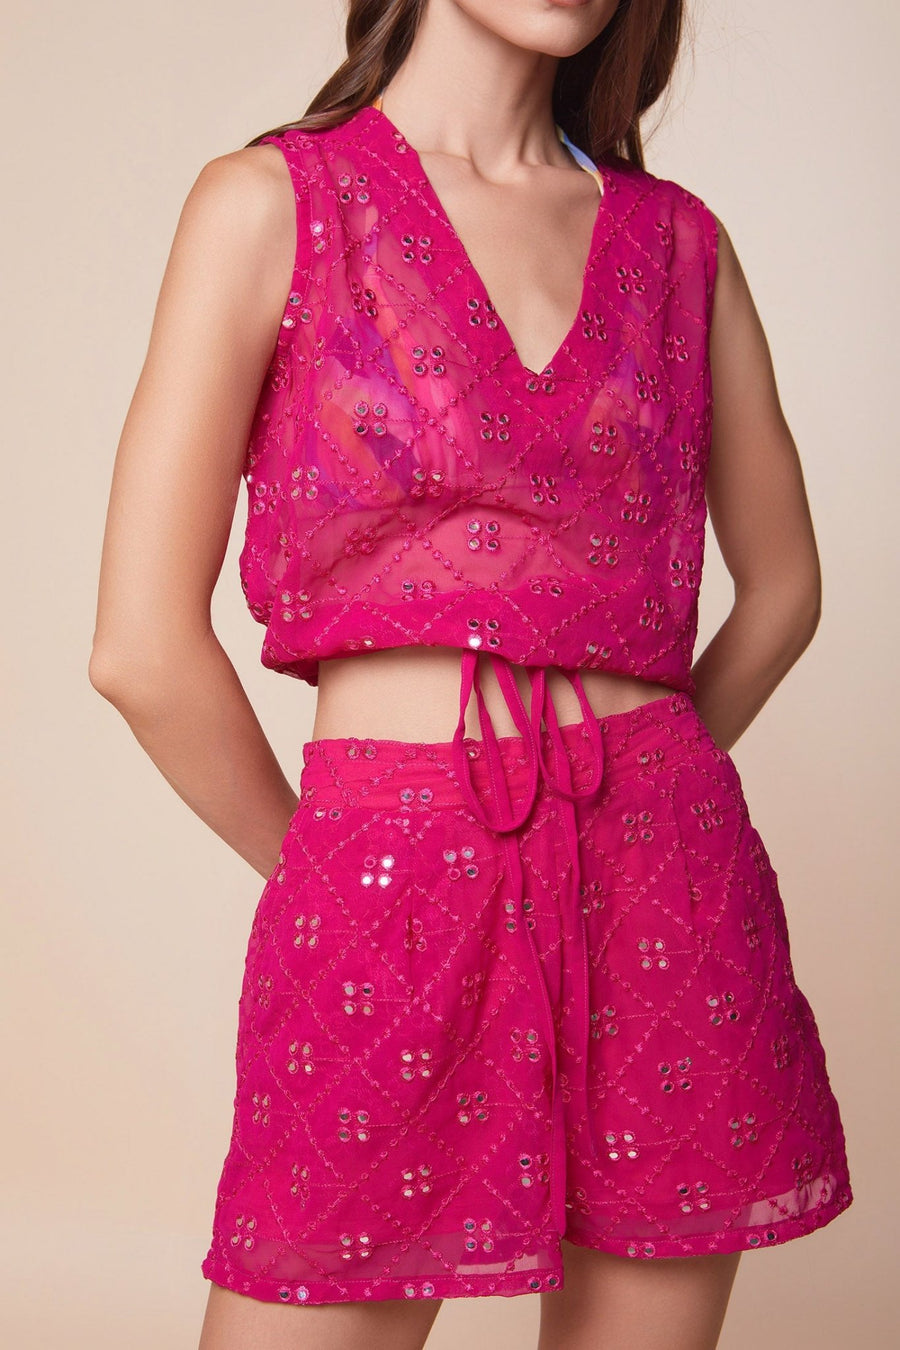 Mirror hot pink Embroidered shorts - nahlaelalfydesigns